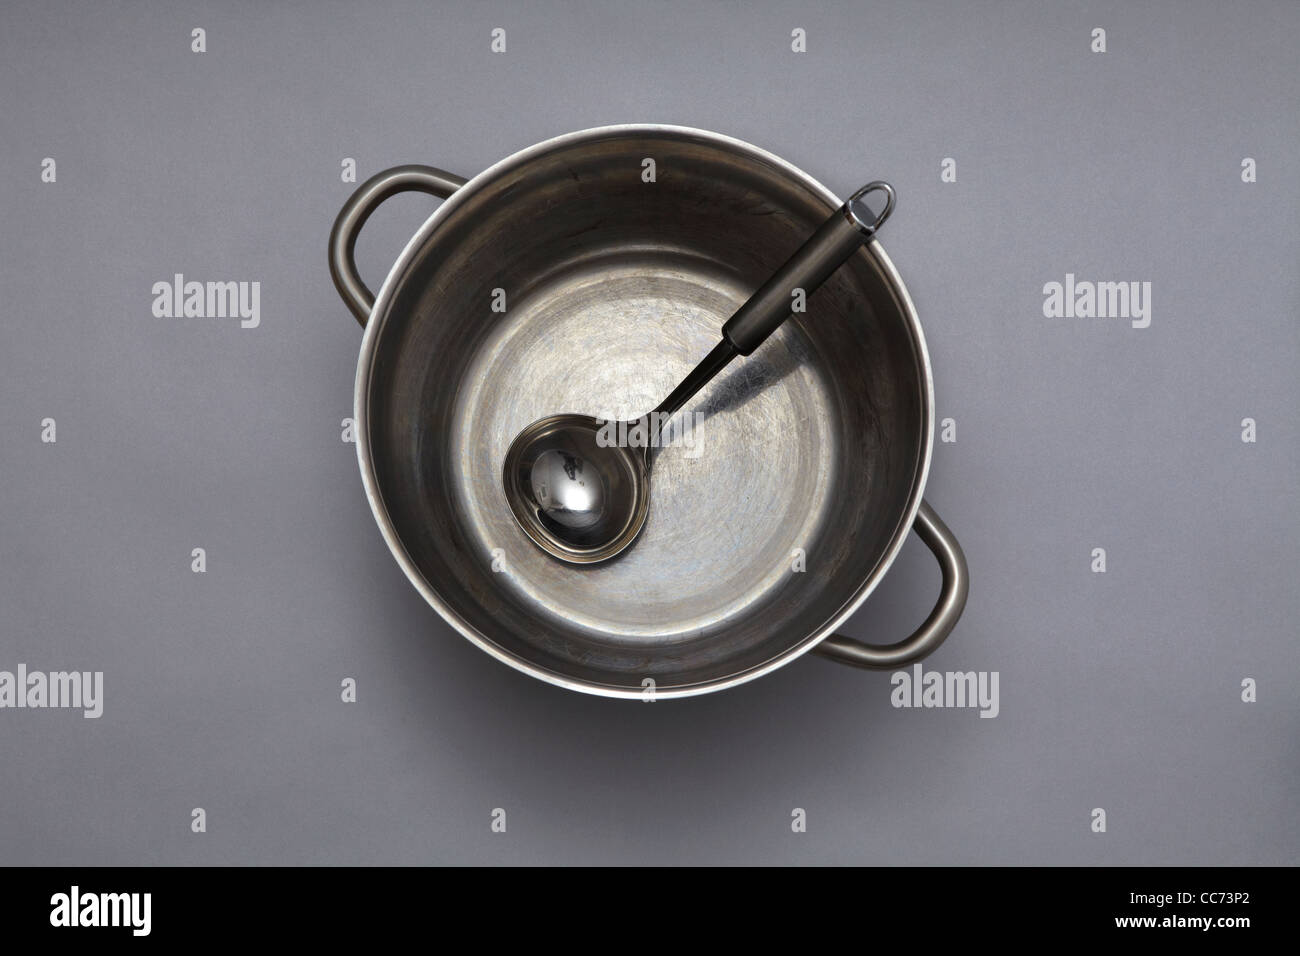 Large metal cooking pot with spoon Stock Photo